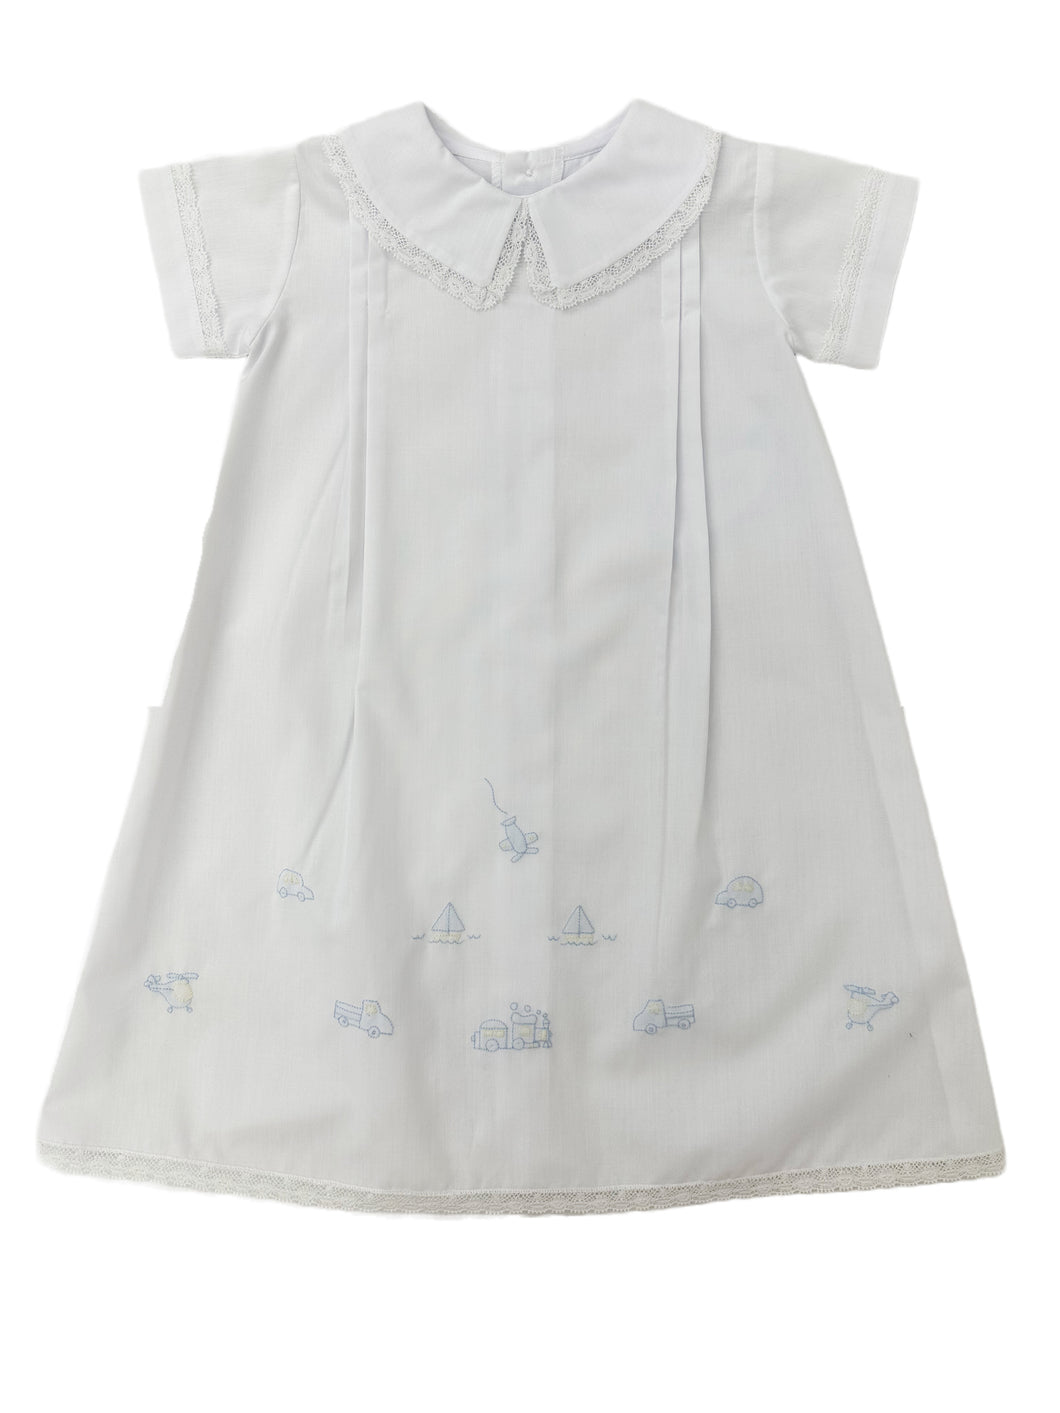 Embroidered Transportation Daygown